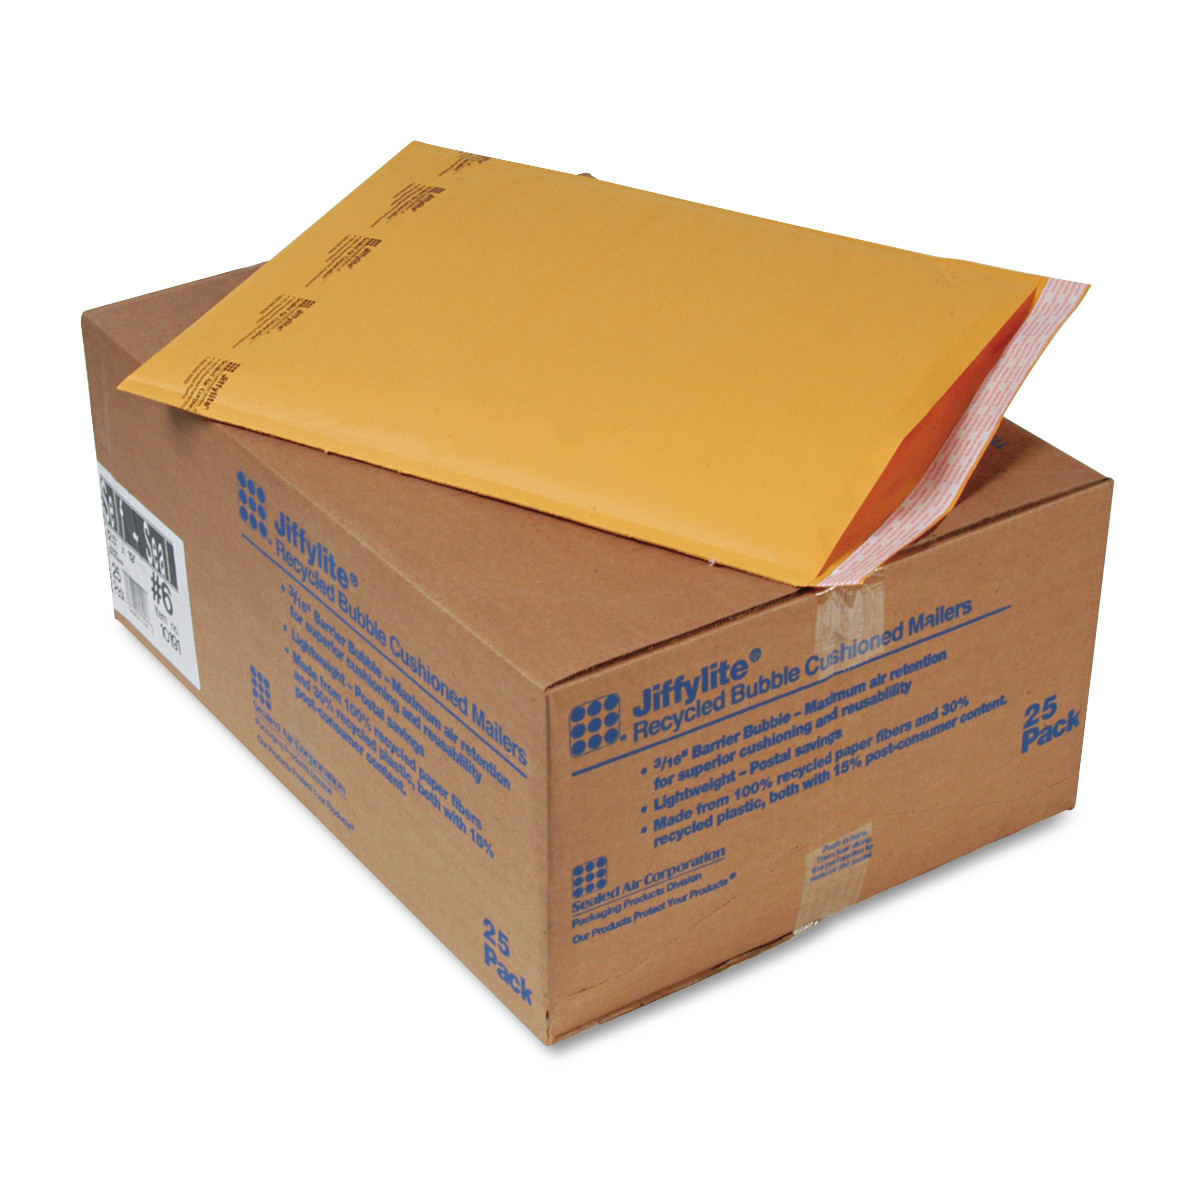 Sealed Air JiffyLite Cellular Cushioned Mailers - Bubble - #6 - 12 1/2" Width x 19" Length - Peel & Seal - Kraft - 25 / Carton -